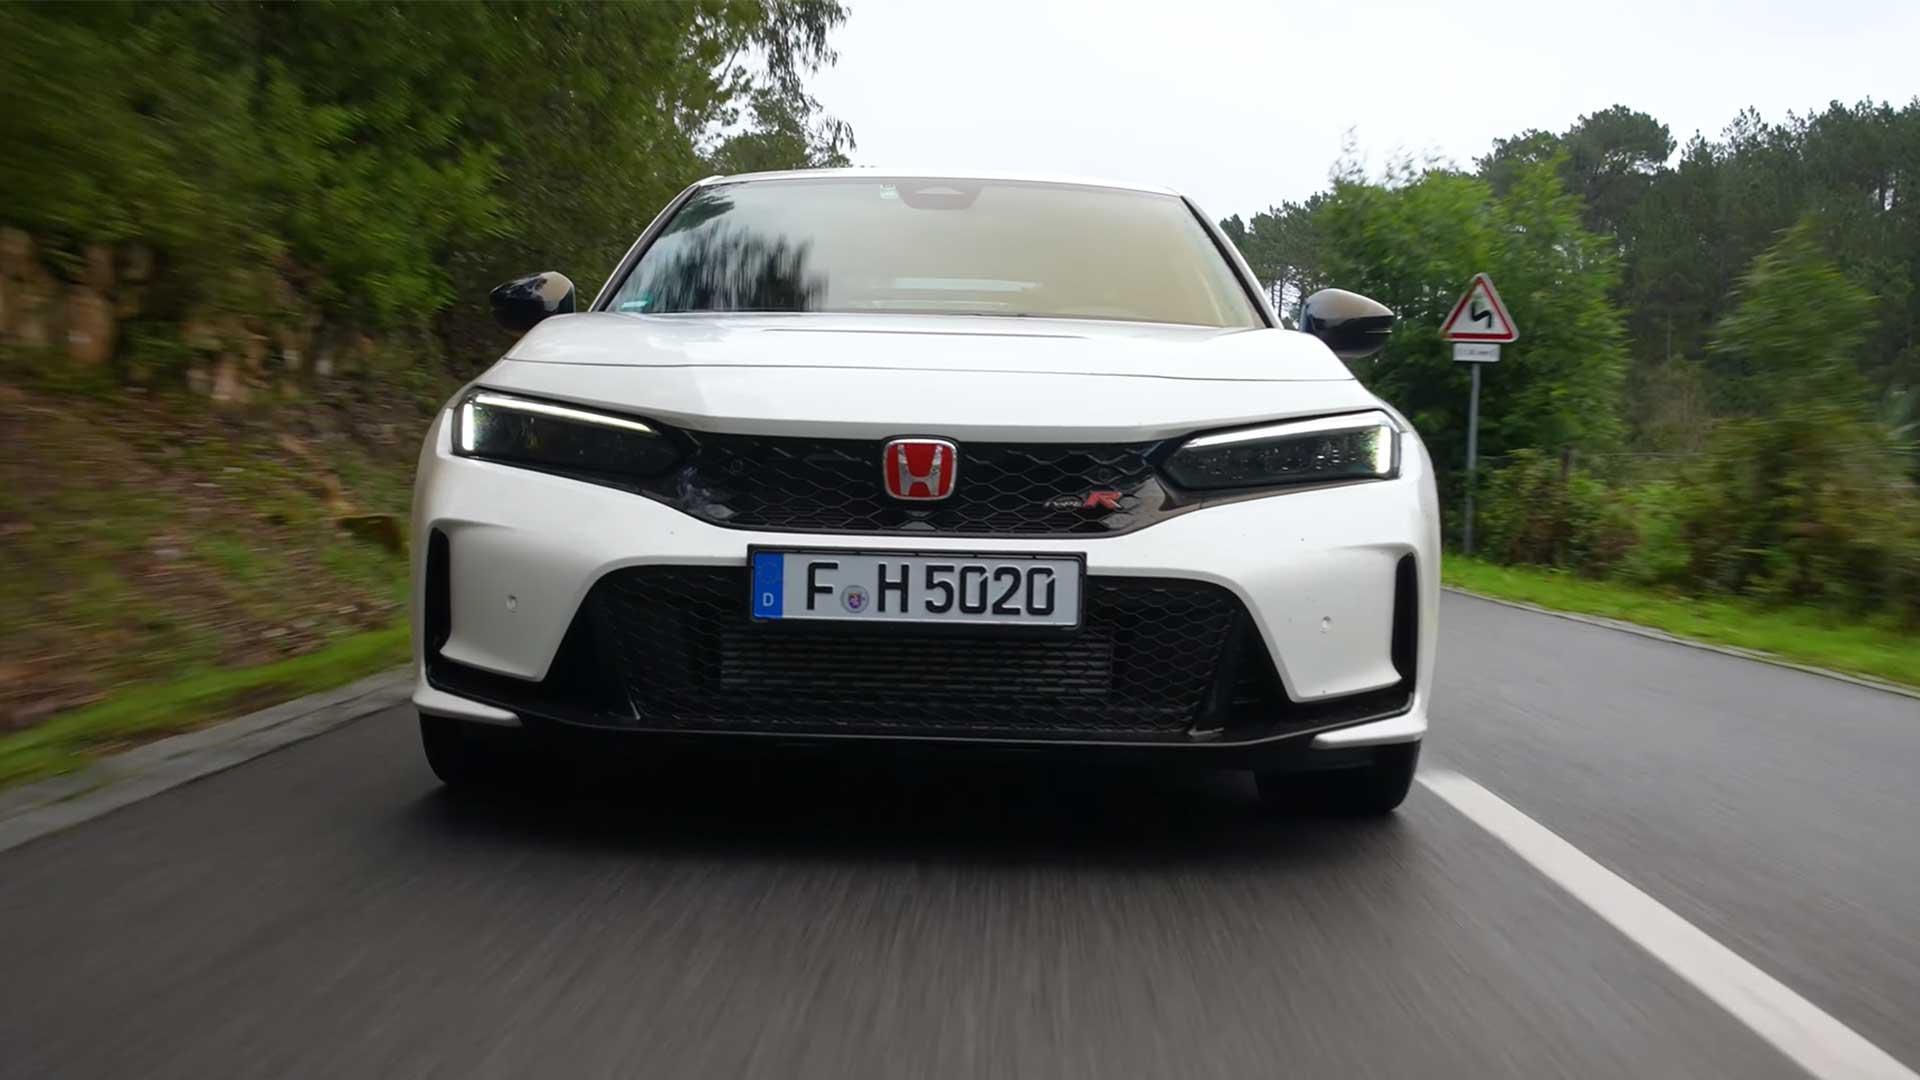 Honda CIvic Type R driving on a road front